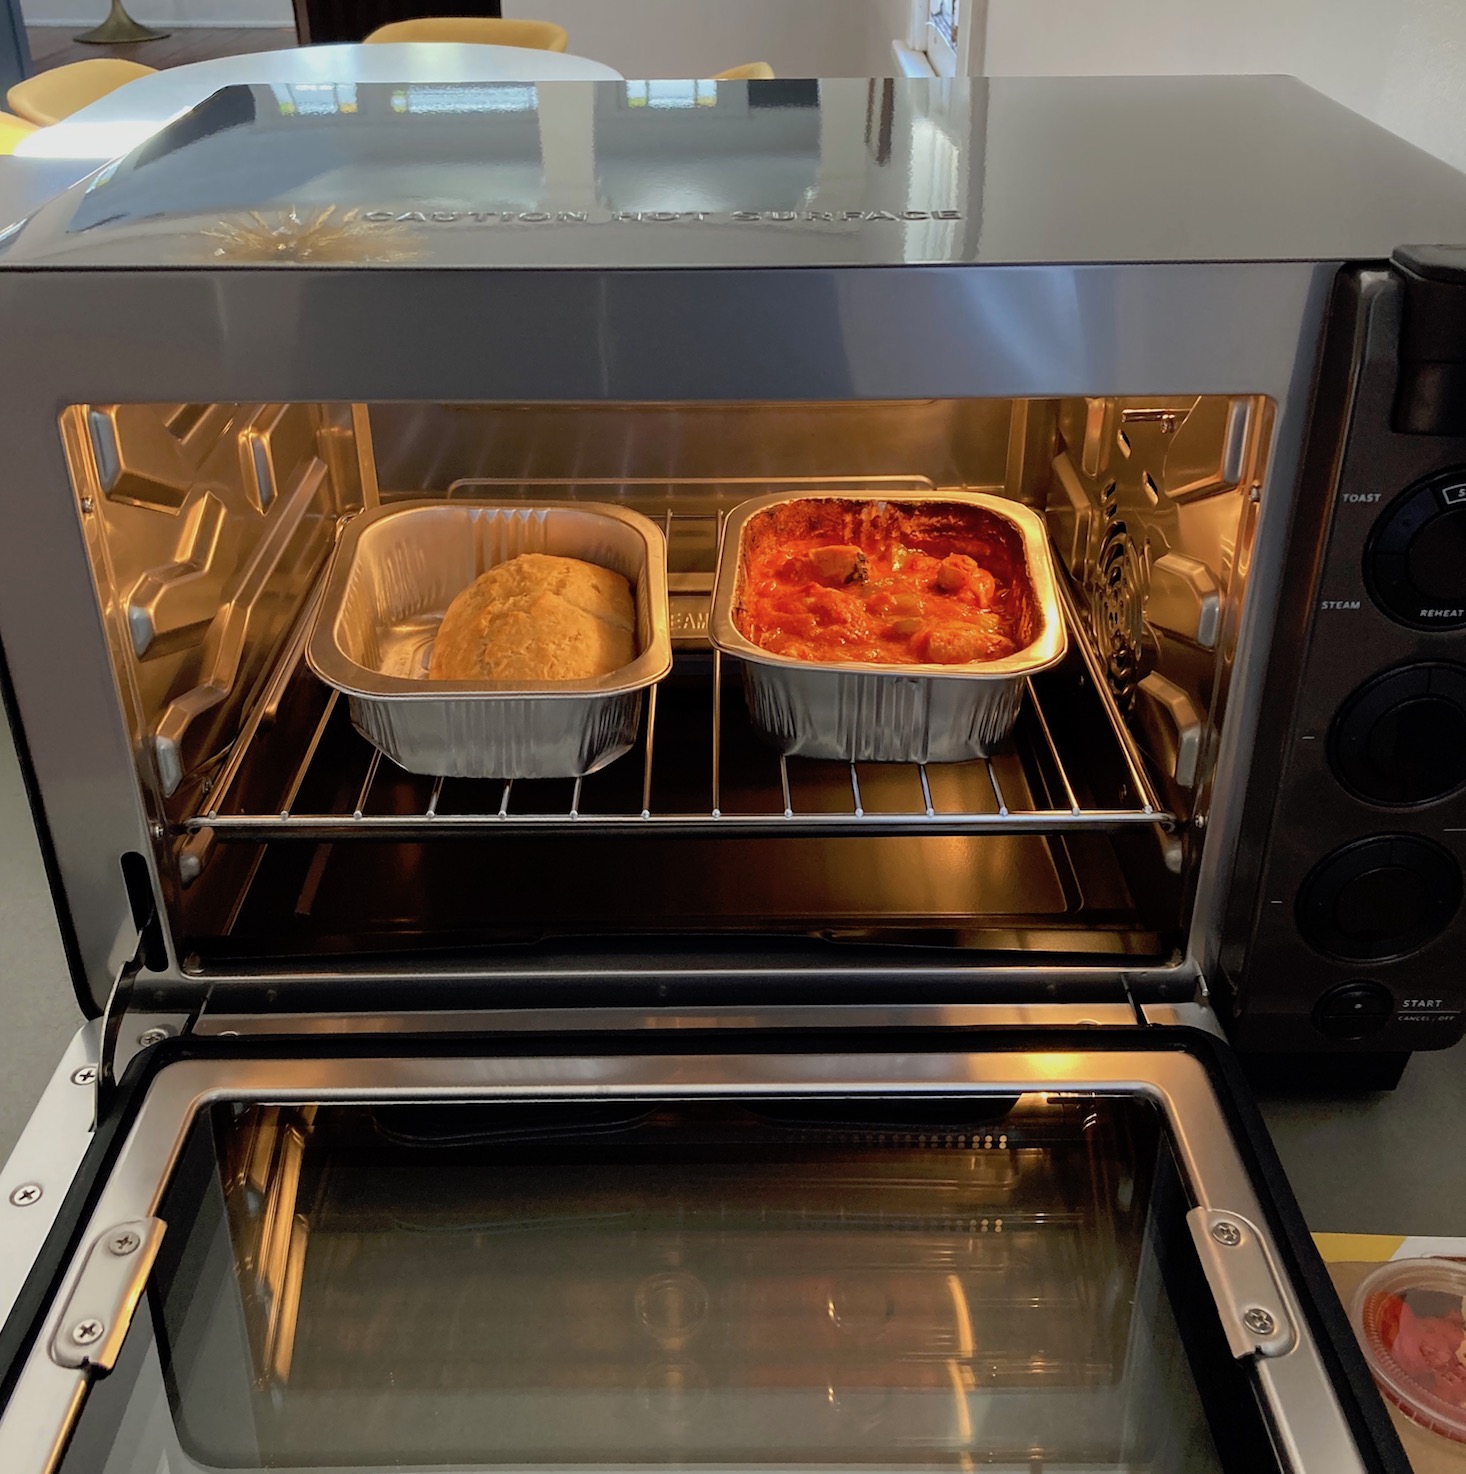 Normally $300, the Tovala Smart Oven Is Just $49 for Memorial Day